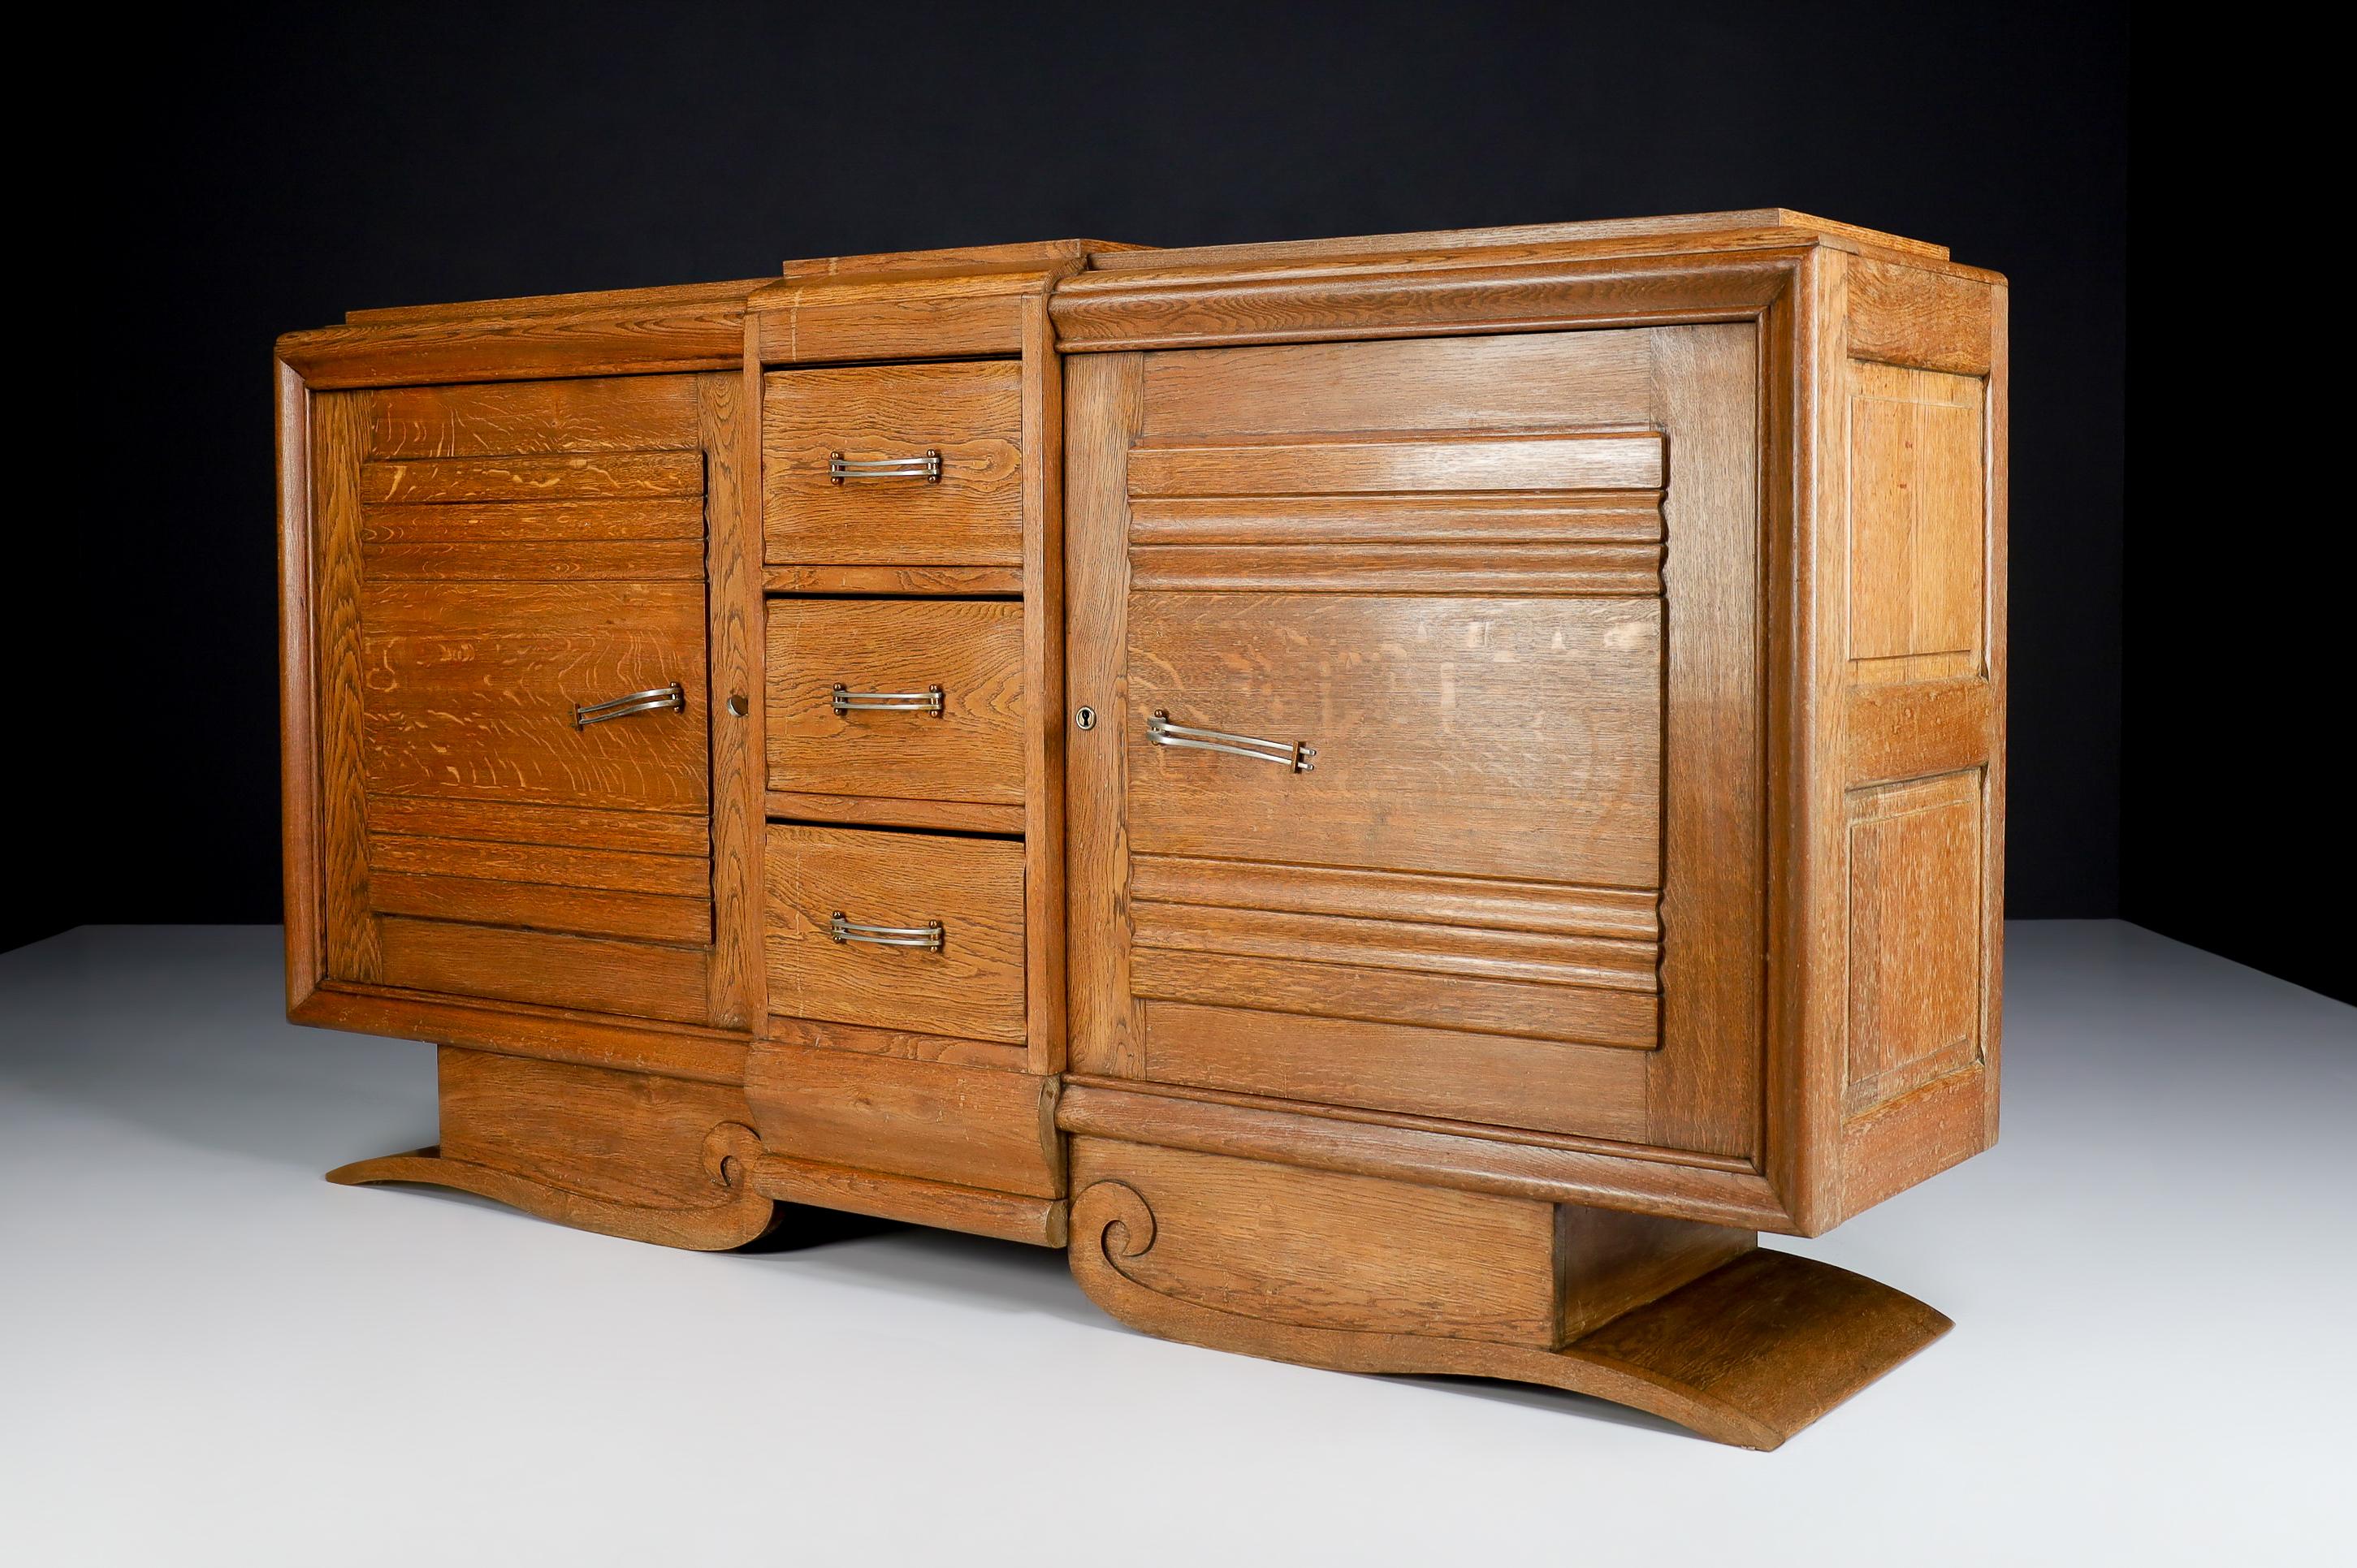 Large Art Deco Brutalist patinated oak Credenza , France 1930s

Large Art Deco Brutalist patinated oak sideboard by Gaston Poison France 1930s. This heavy Brutalist credenza seems to float on its elegant base. The credenza consists of two large